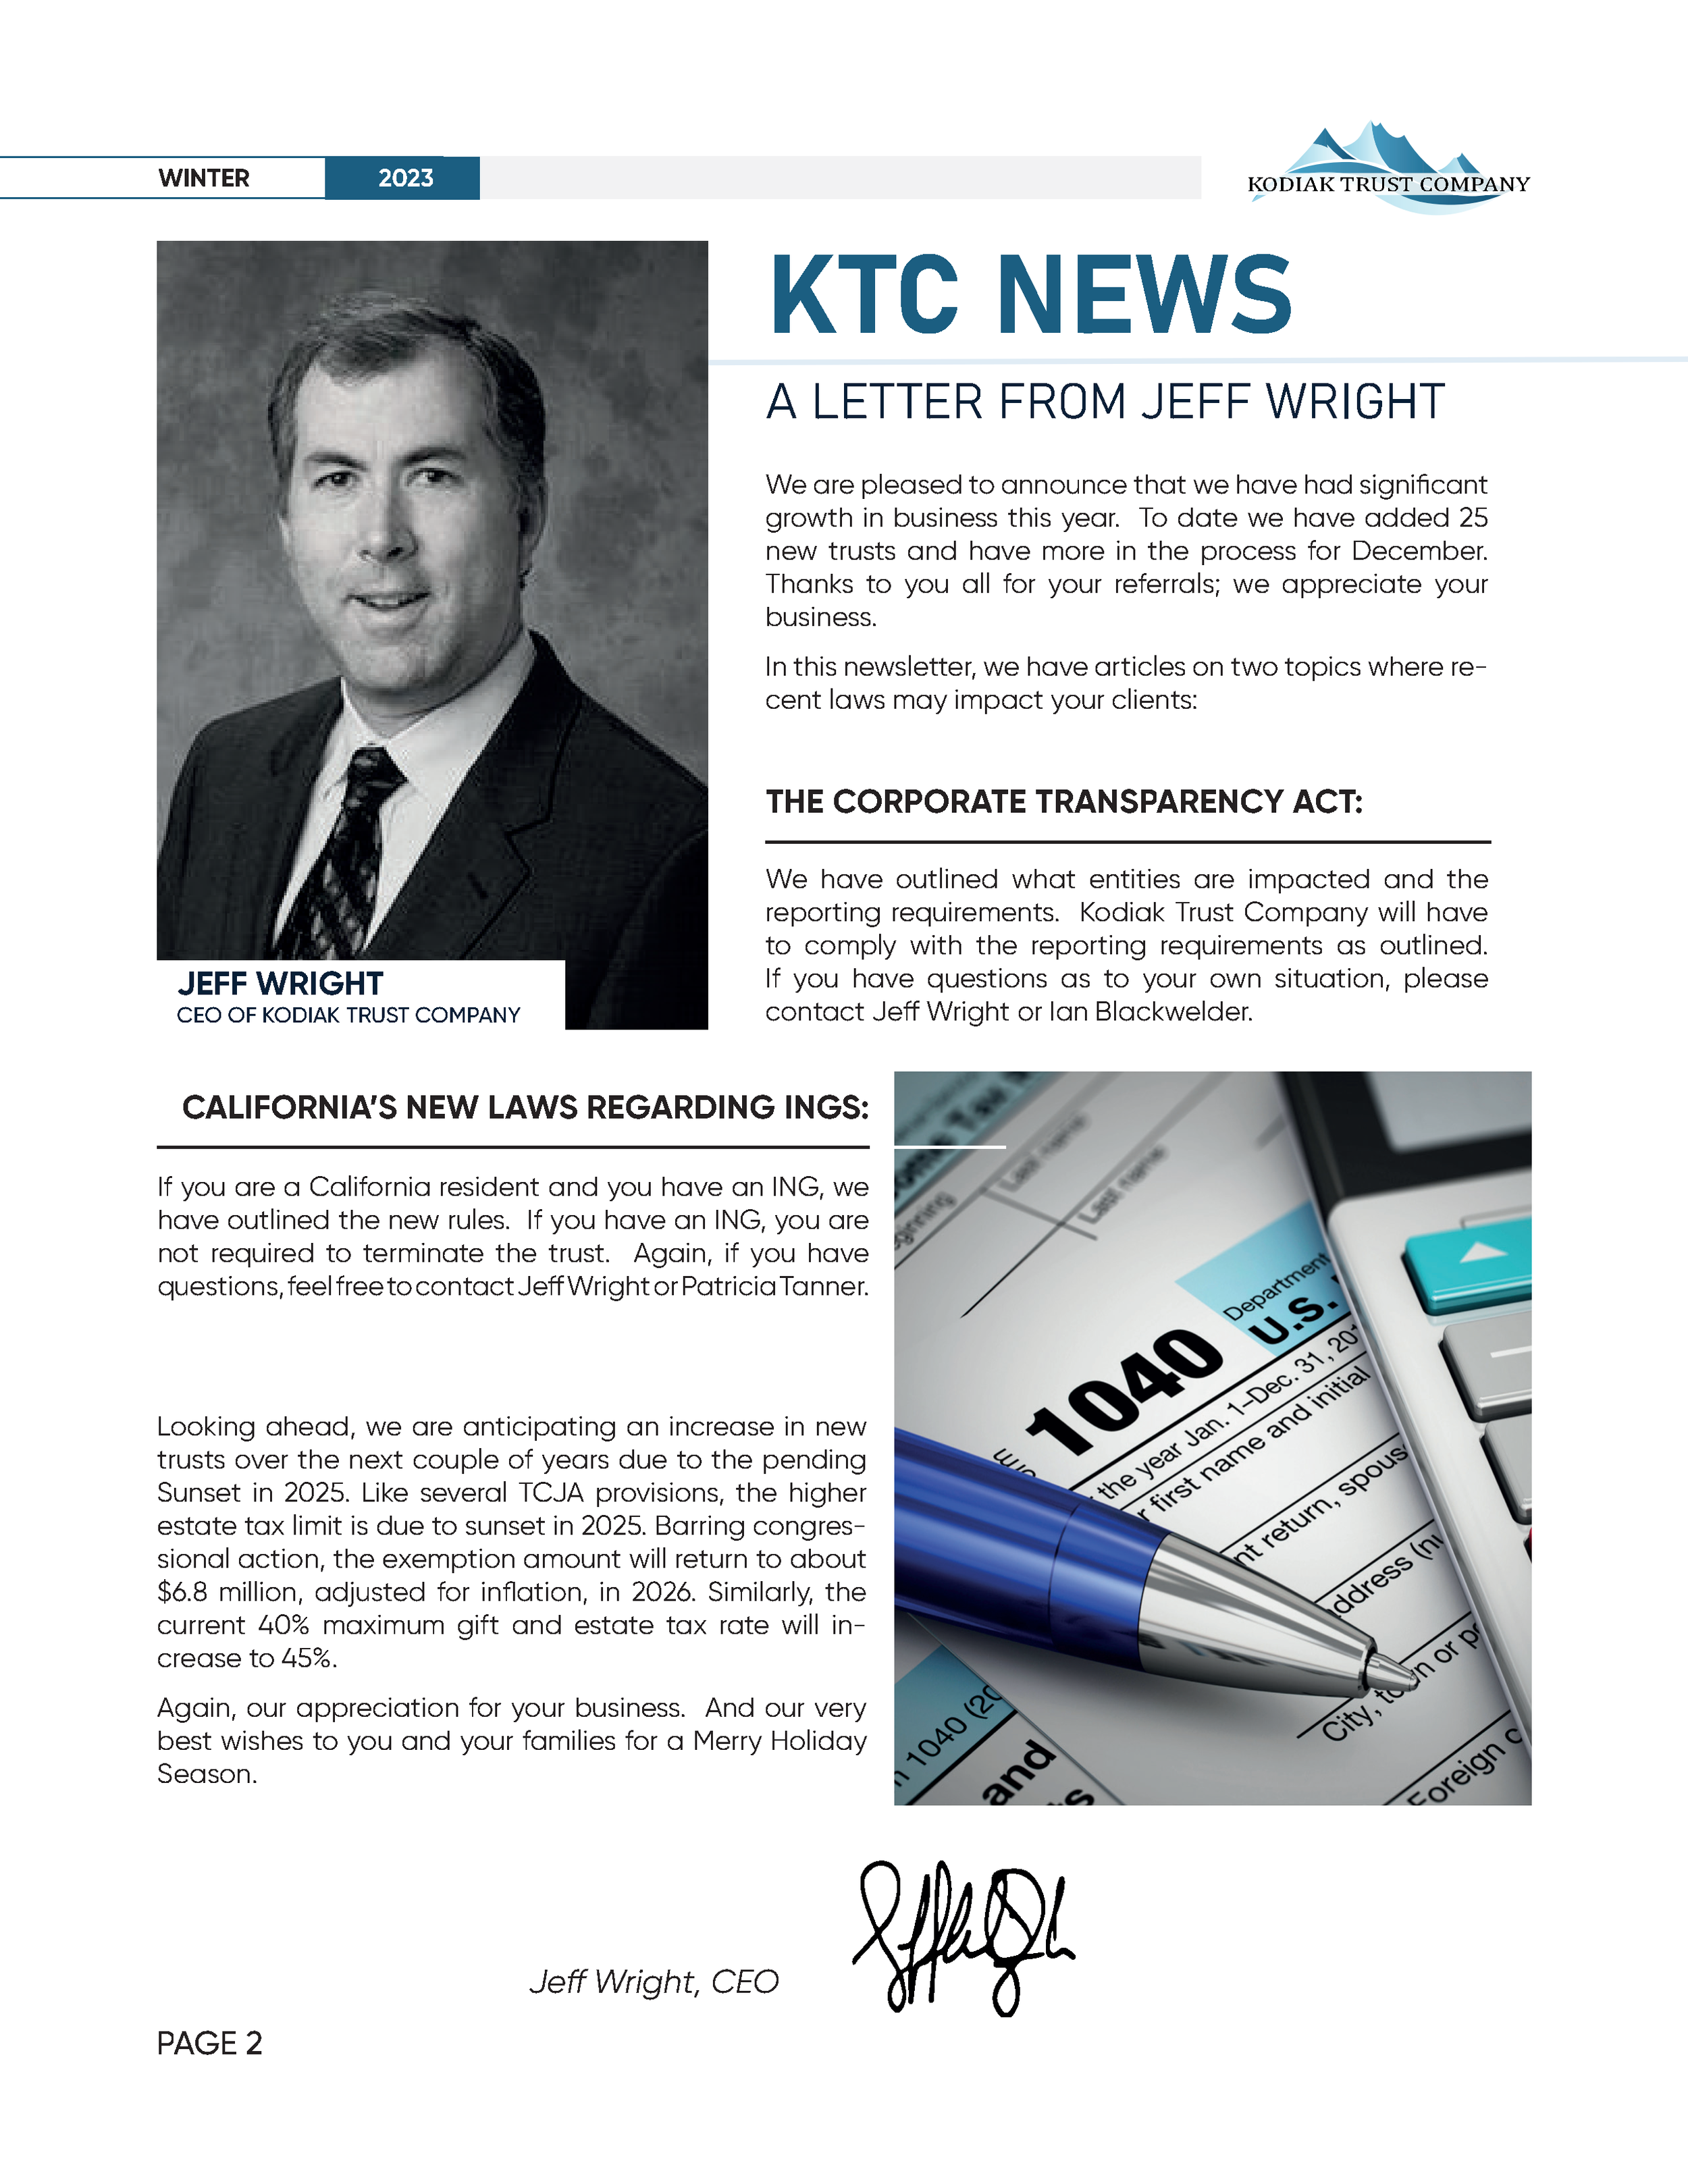 KTC QUARTERLY NEWSLETTER WINTER 2023_Page2.png